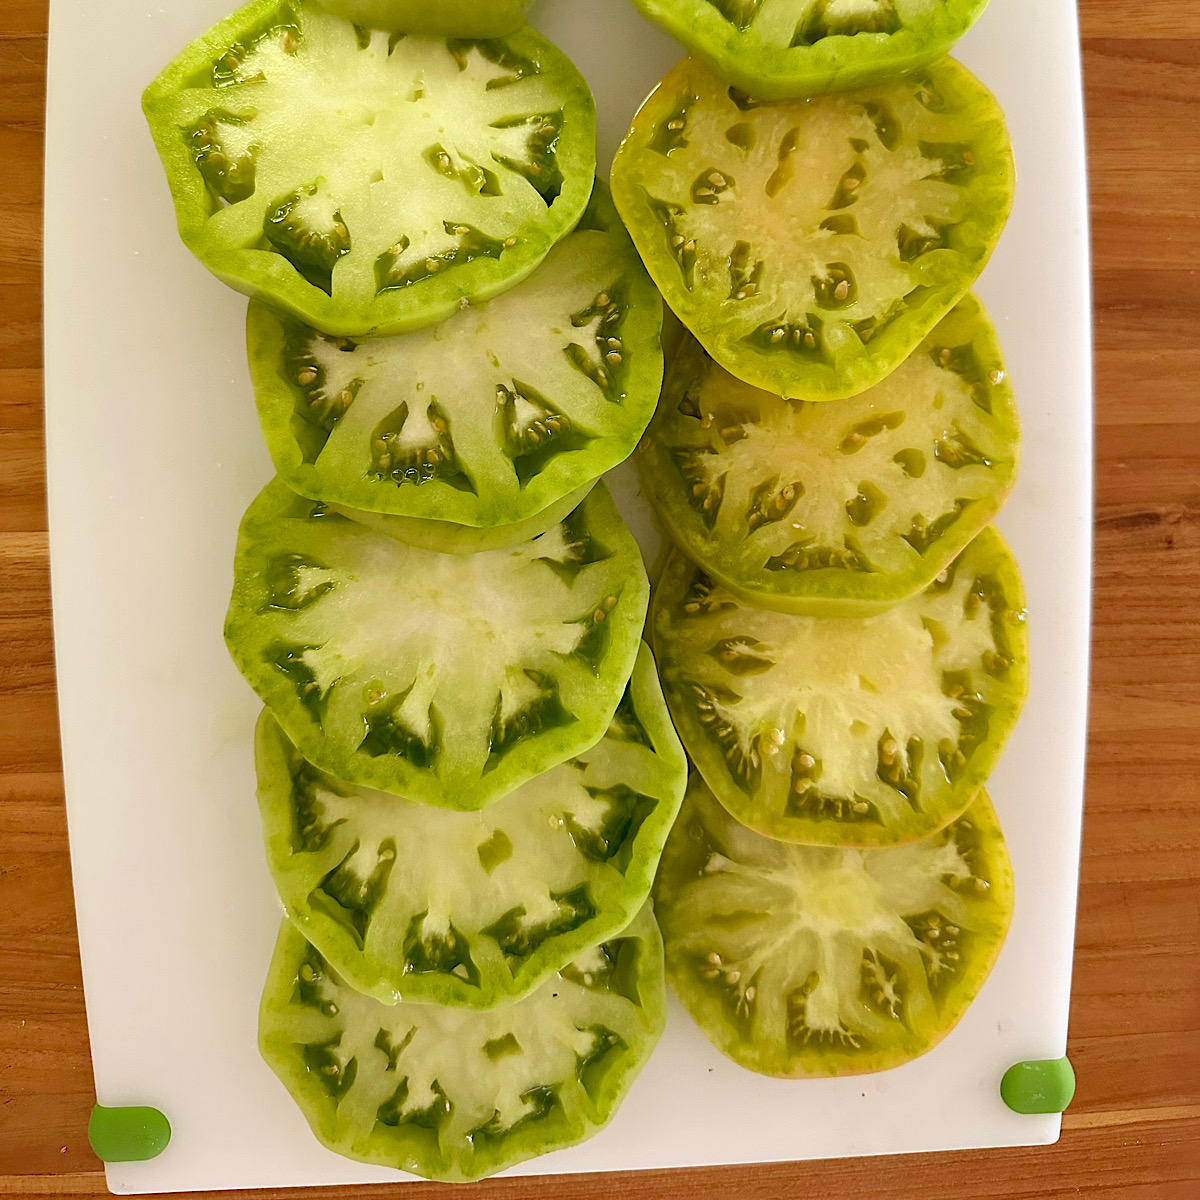 Green tomatoes sliced and layered on white board.